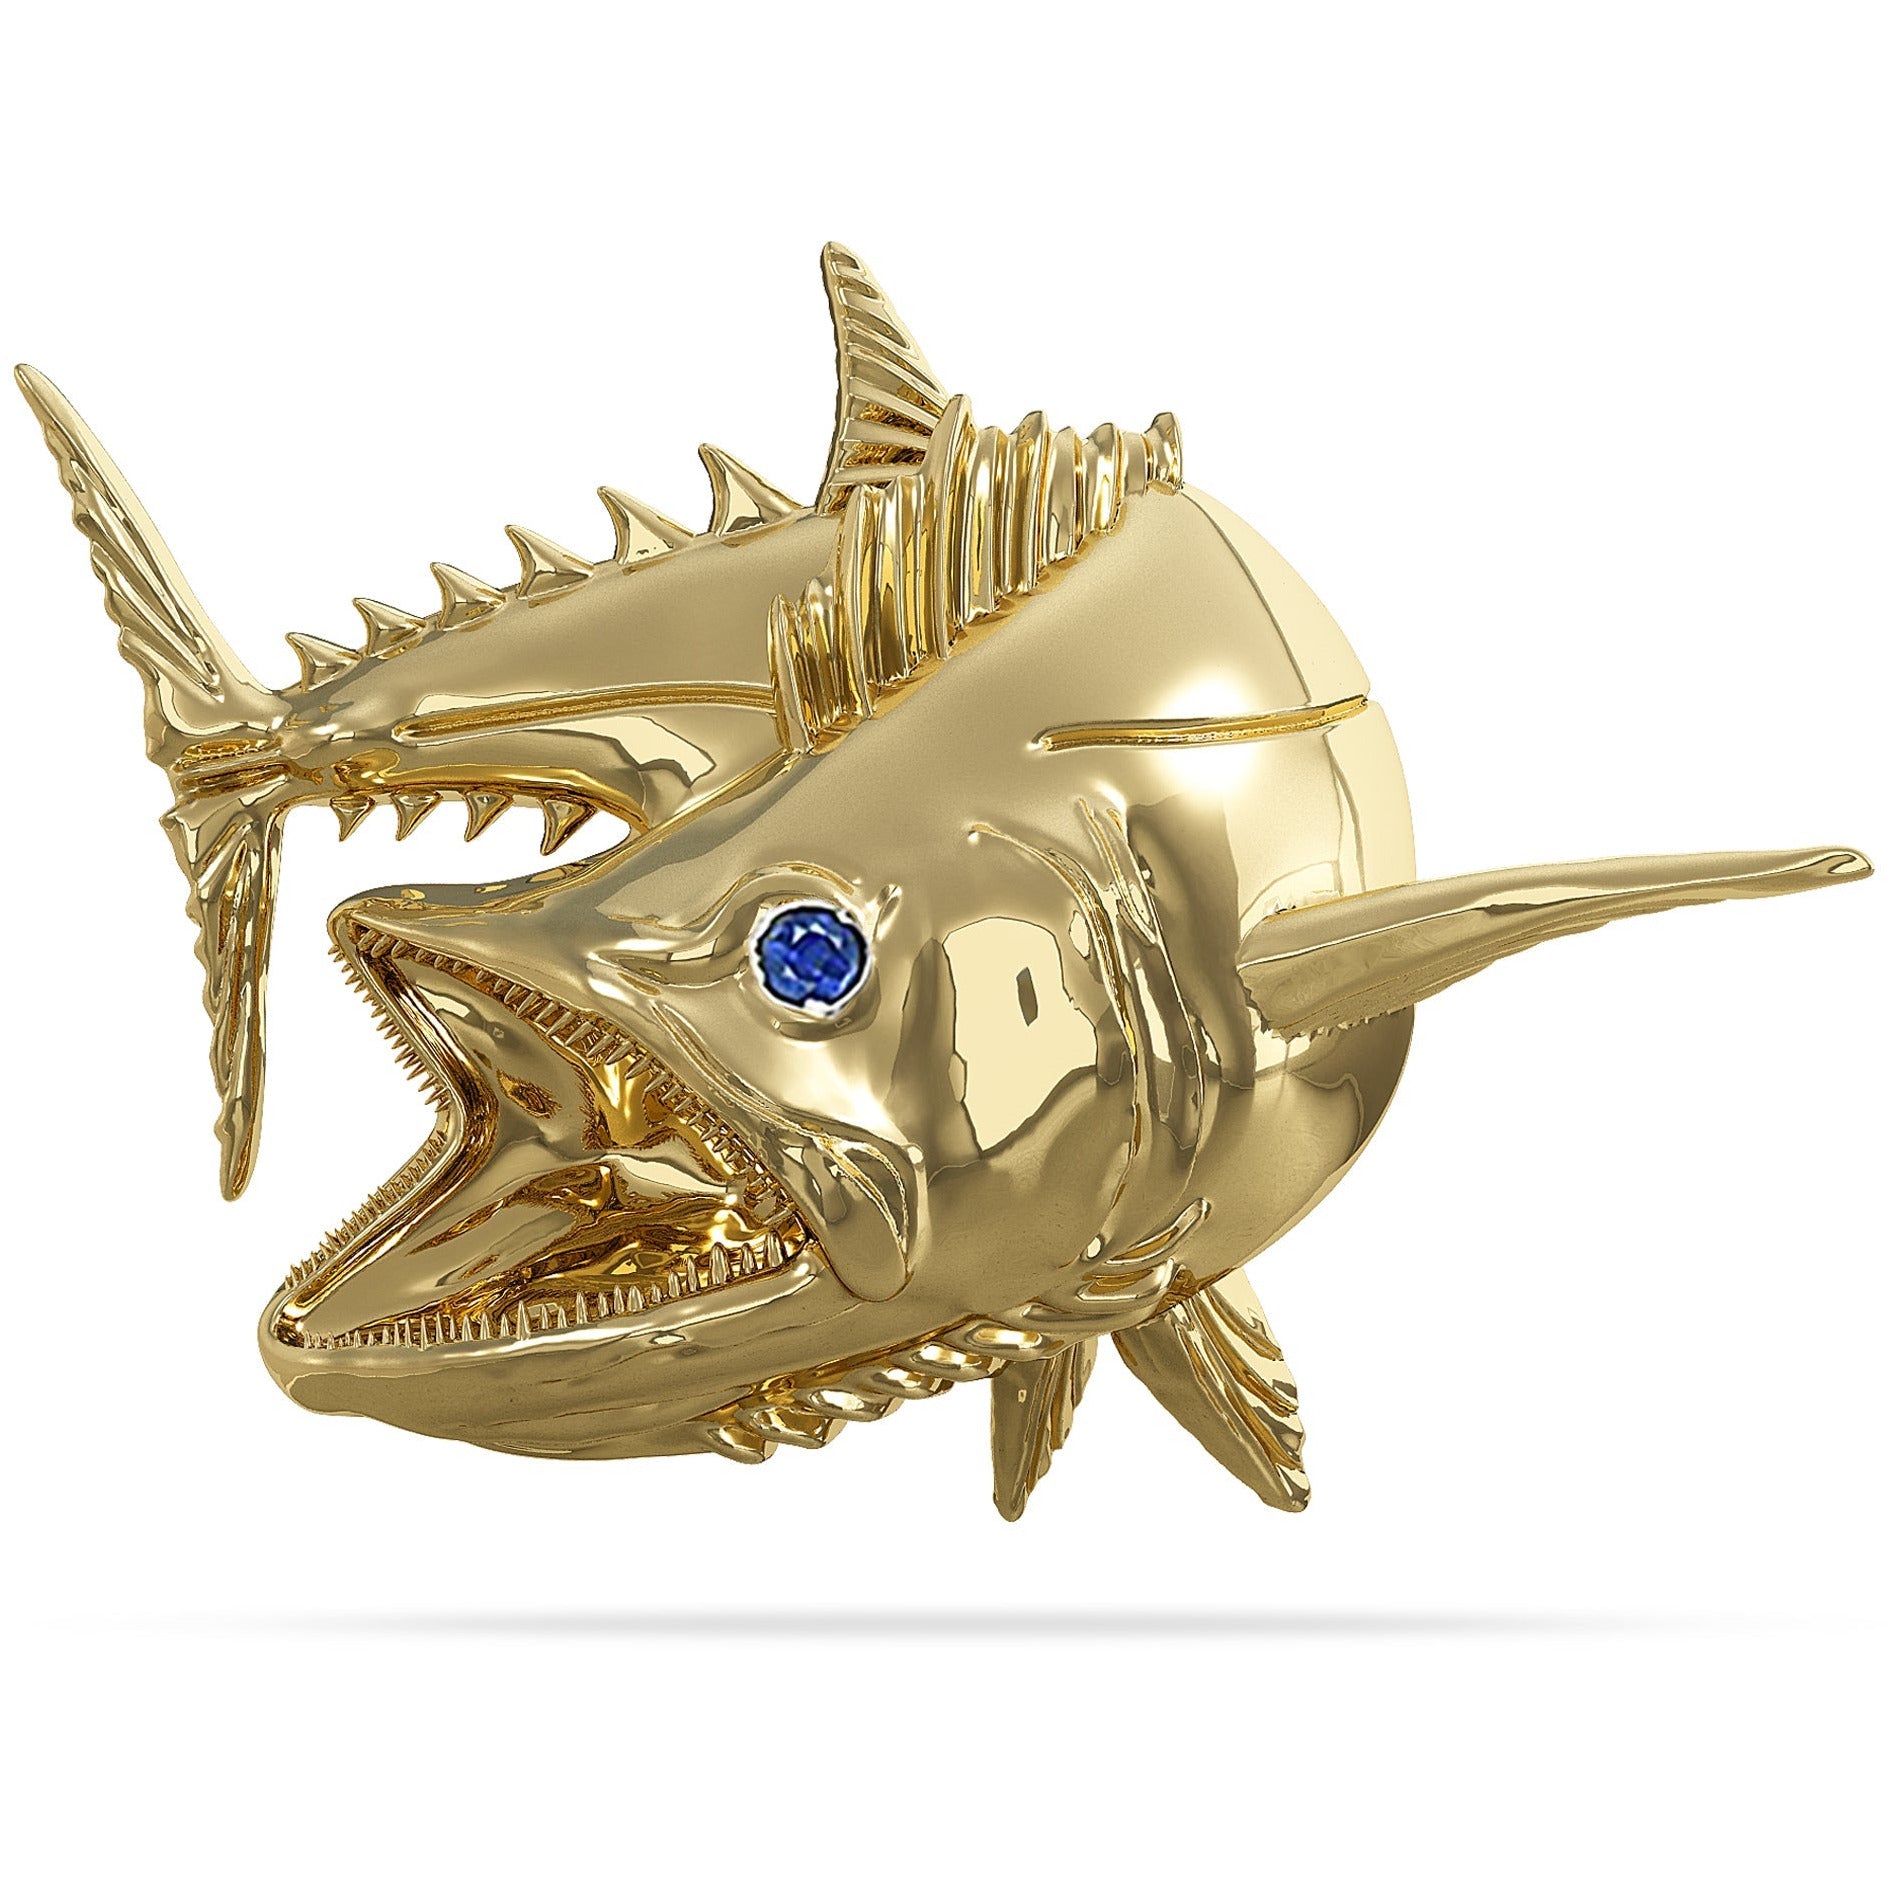 Solid 14k Gold Kingfish Mackerel Fish Pendant High Polished Mirror Finish With Blue Sapphire Eye with A Mariner Shackle Bail Custom Designed By Nautical Treasure Jewelry In The Florida Keys SKA